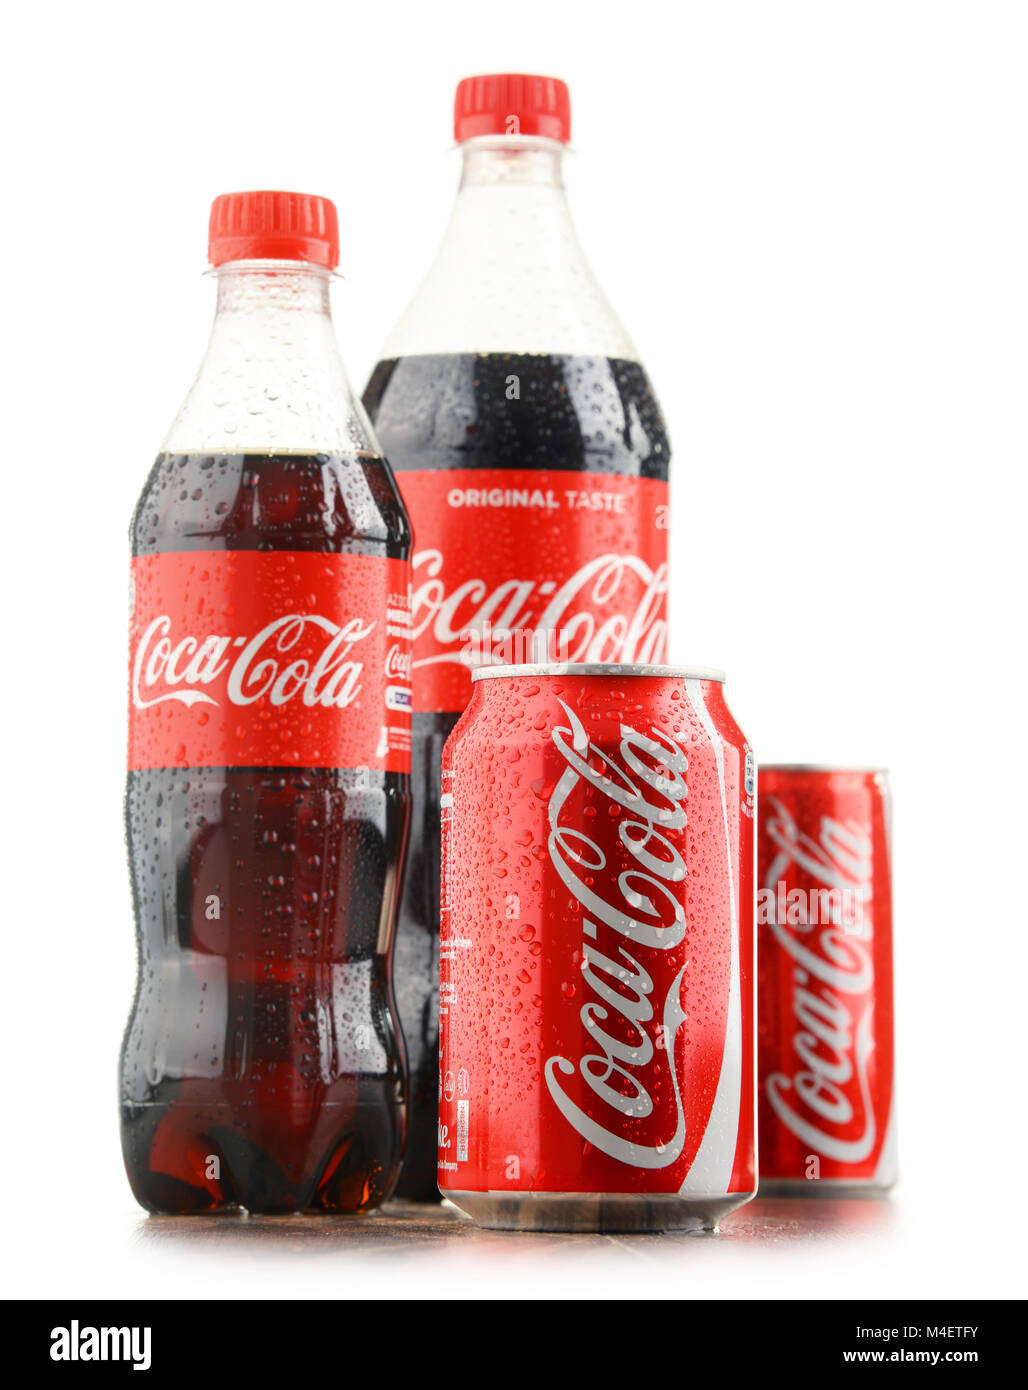 https://c8.alamy.com/comp/M4ETFY/bottles-and-cans-of-coca-cola-M4ETFY.jpg